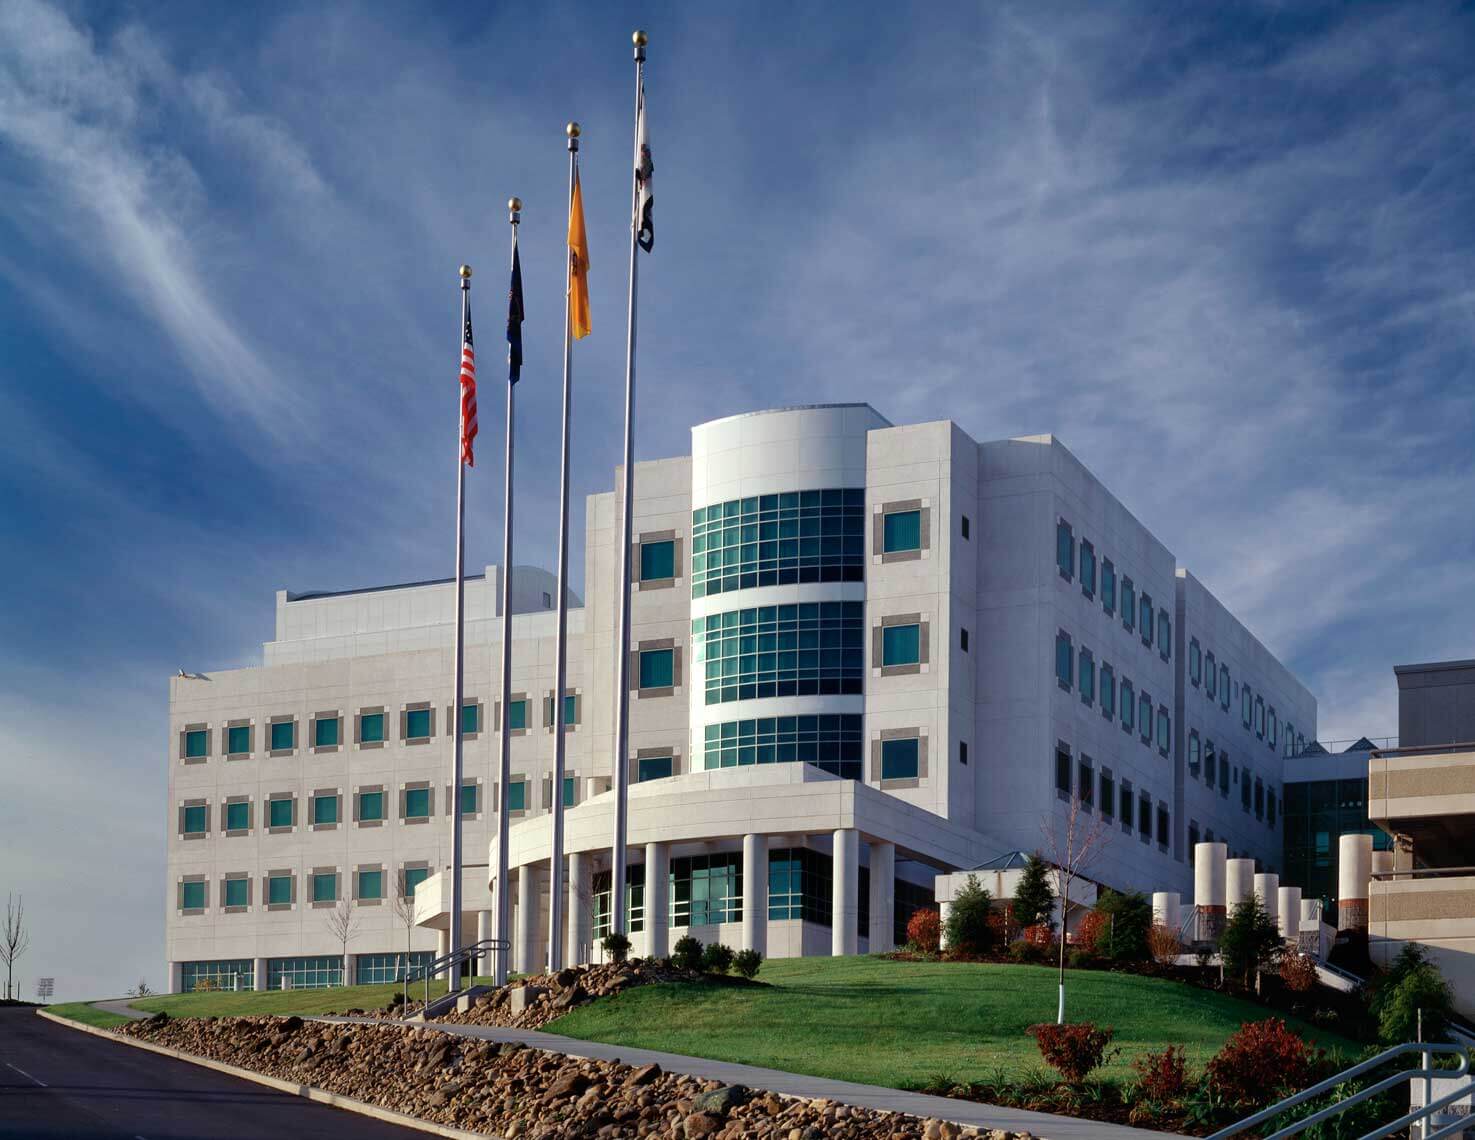 A daytime exterior view of the architecture at NIOSH and its surrounding landscaping